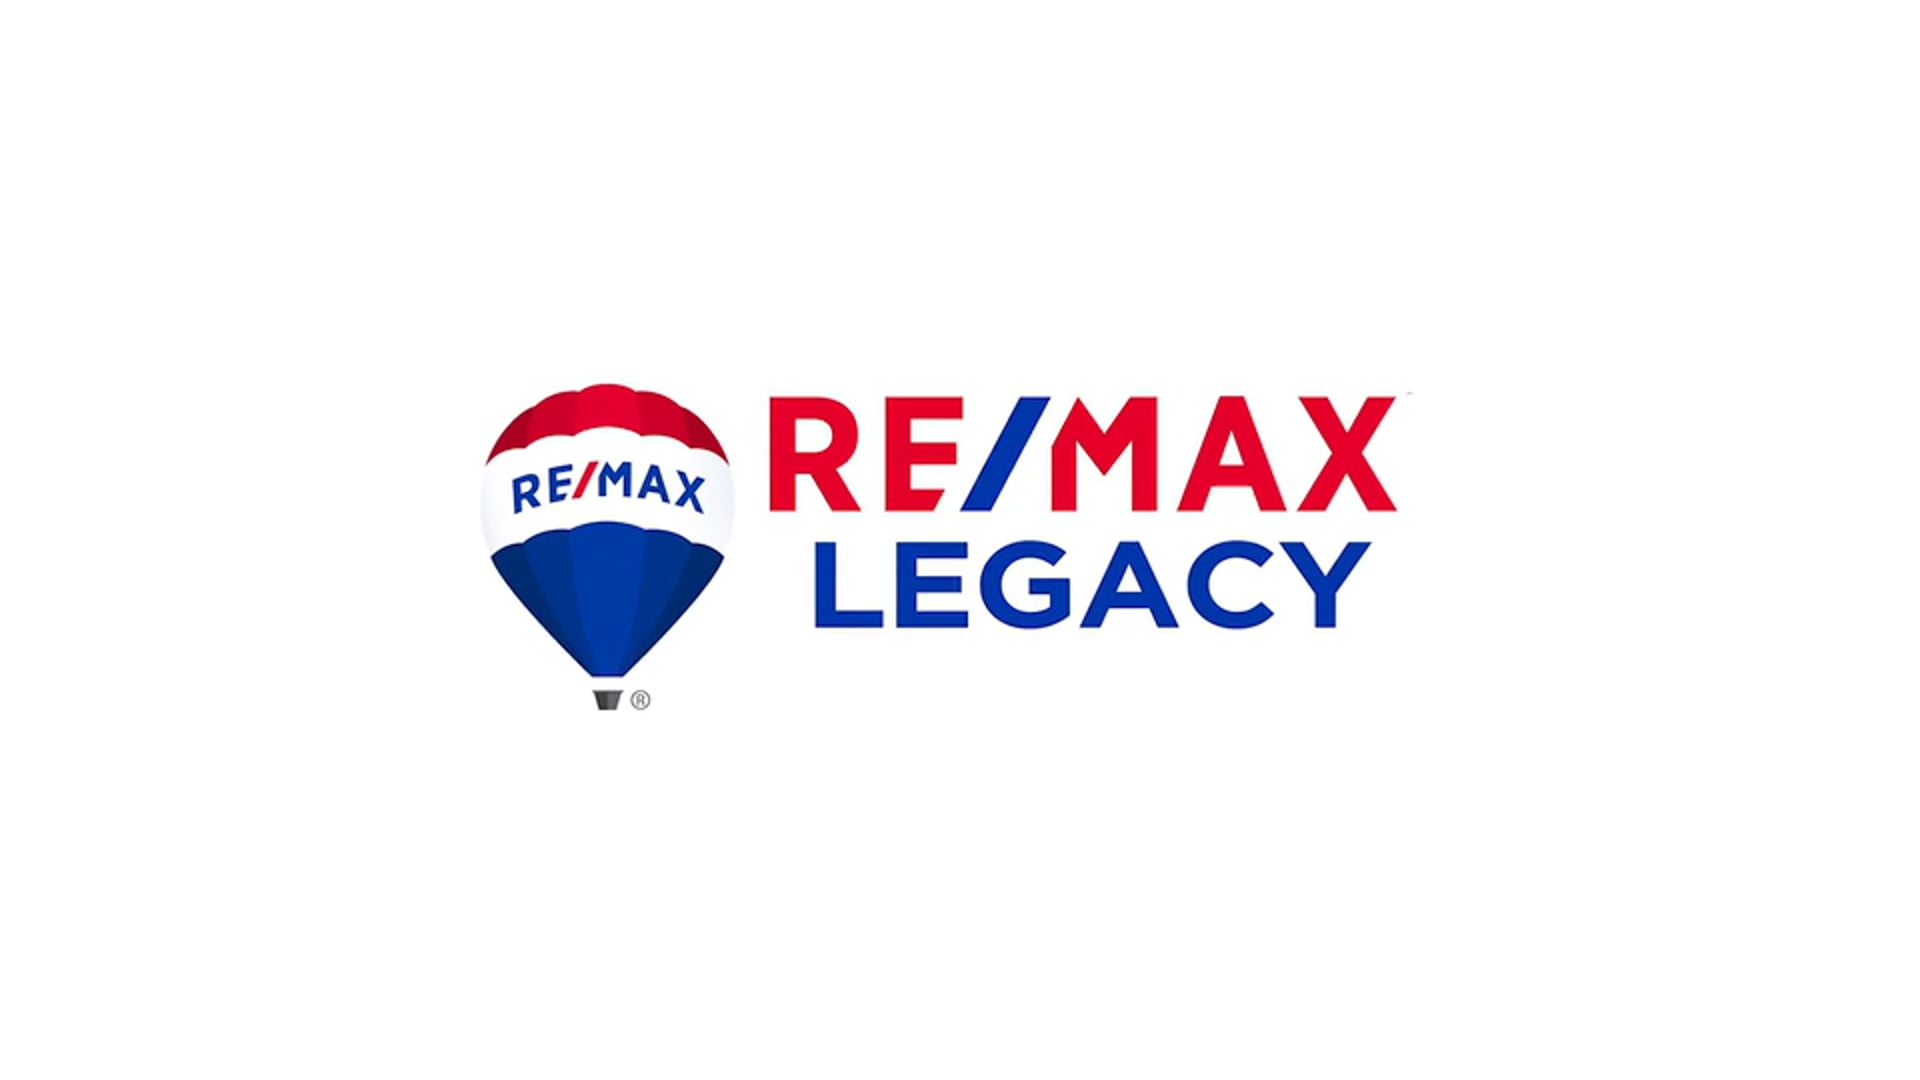 REMAX Legacy - 442 E State St Pendleton, IN